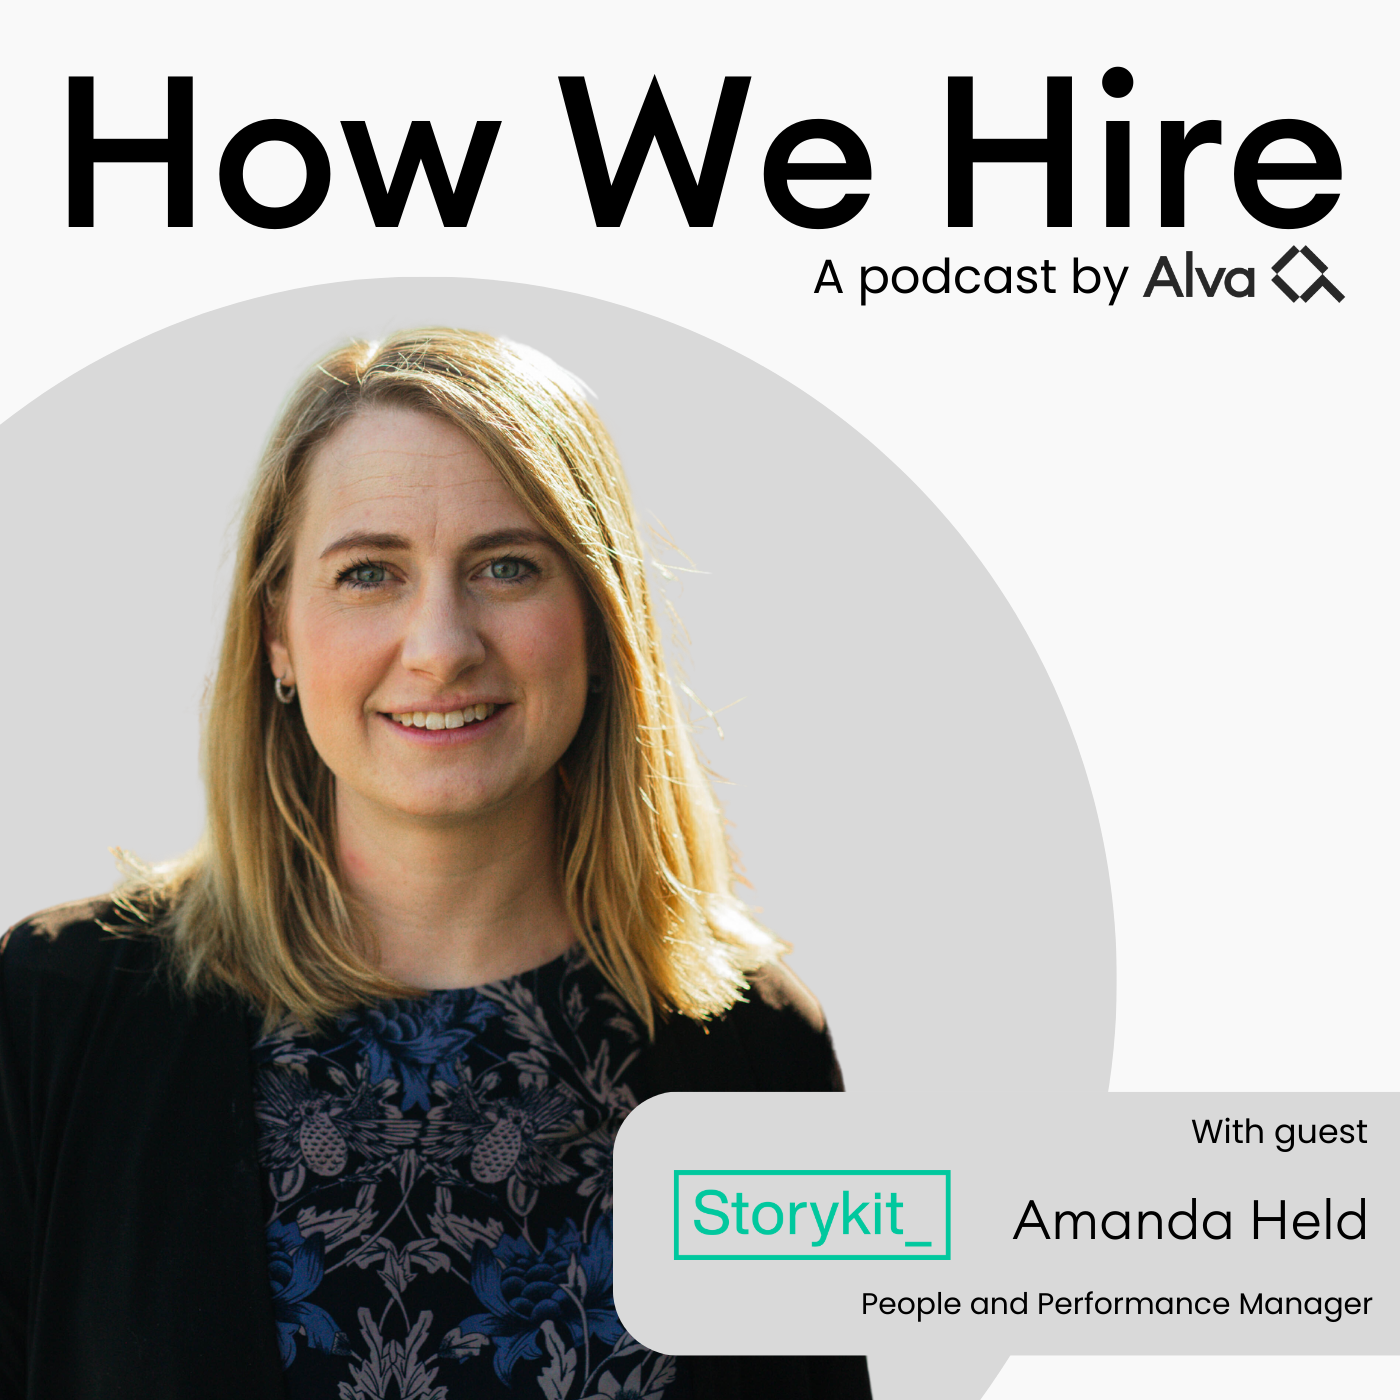 Amanda Held on: A psychologist's guide to measuring job performance with human behaviour